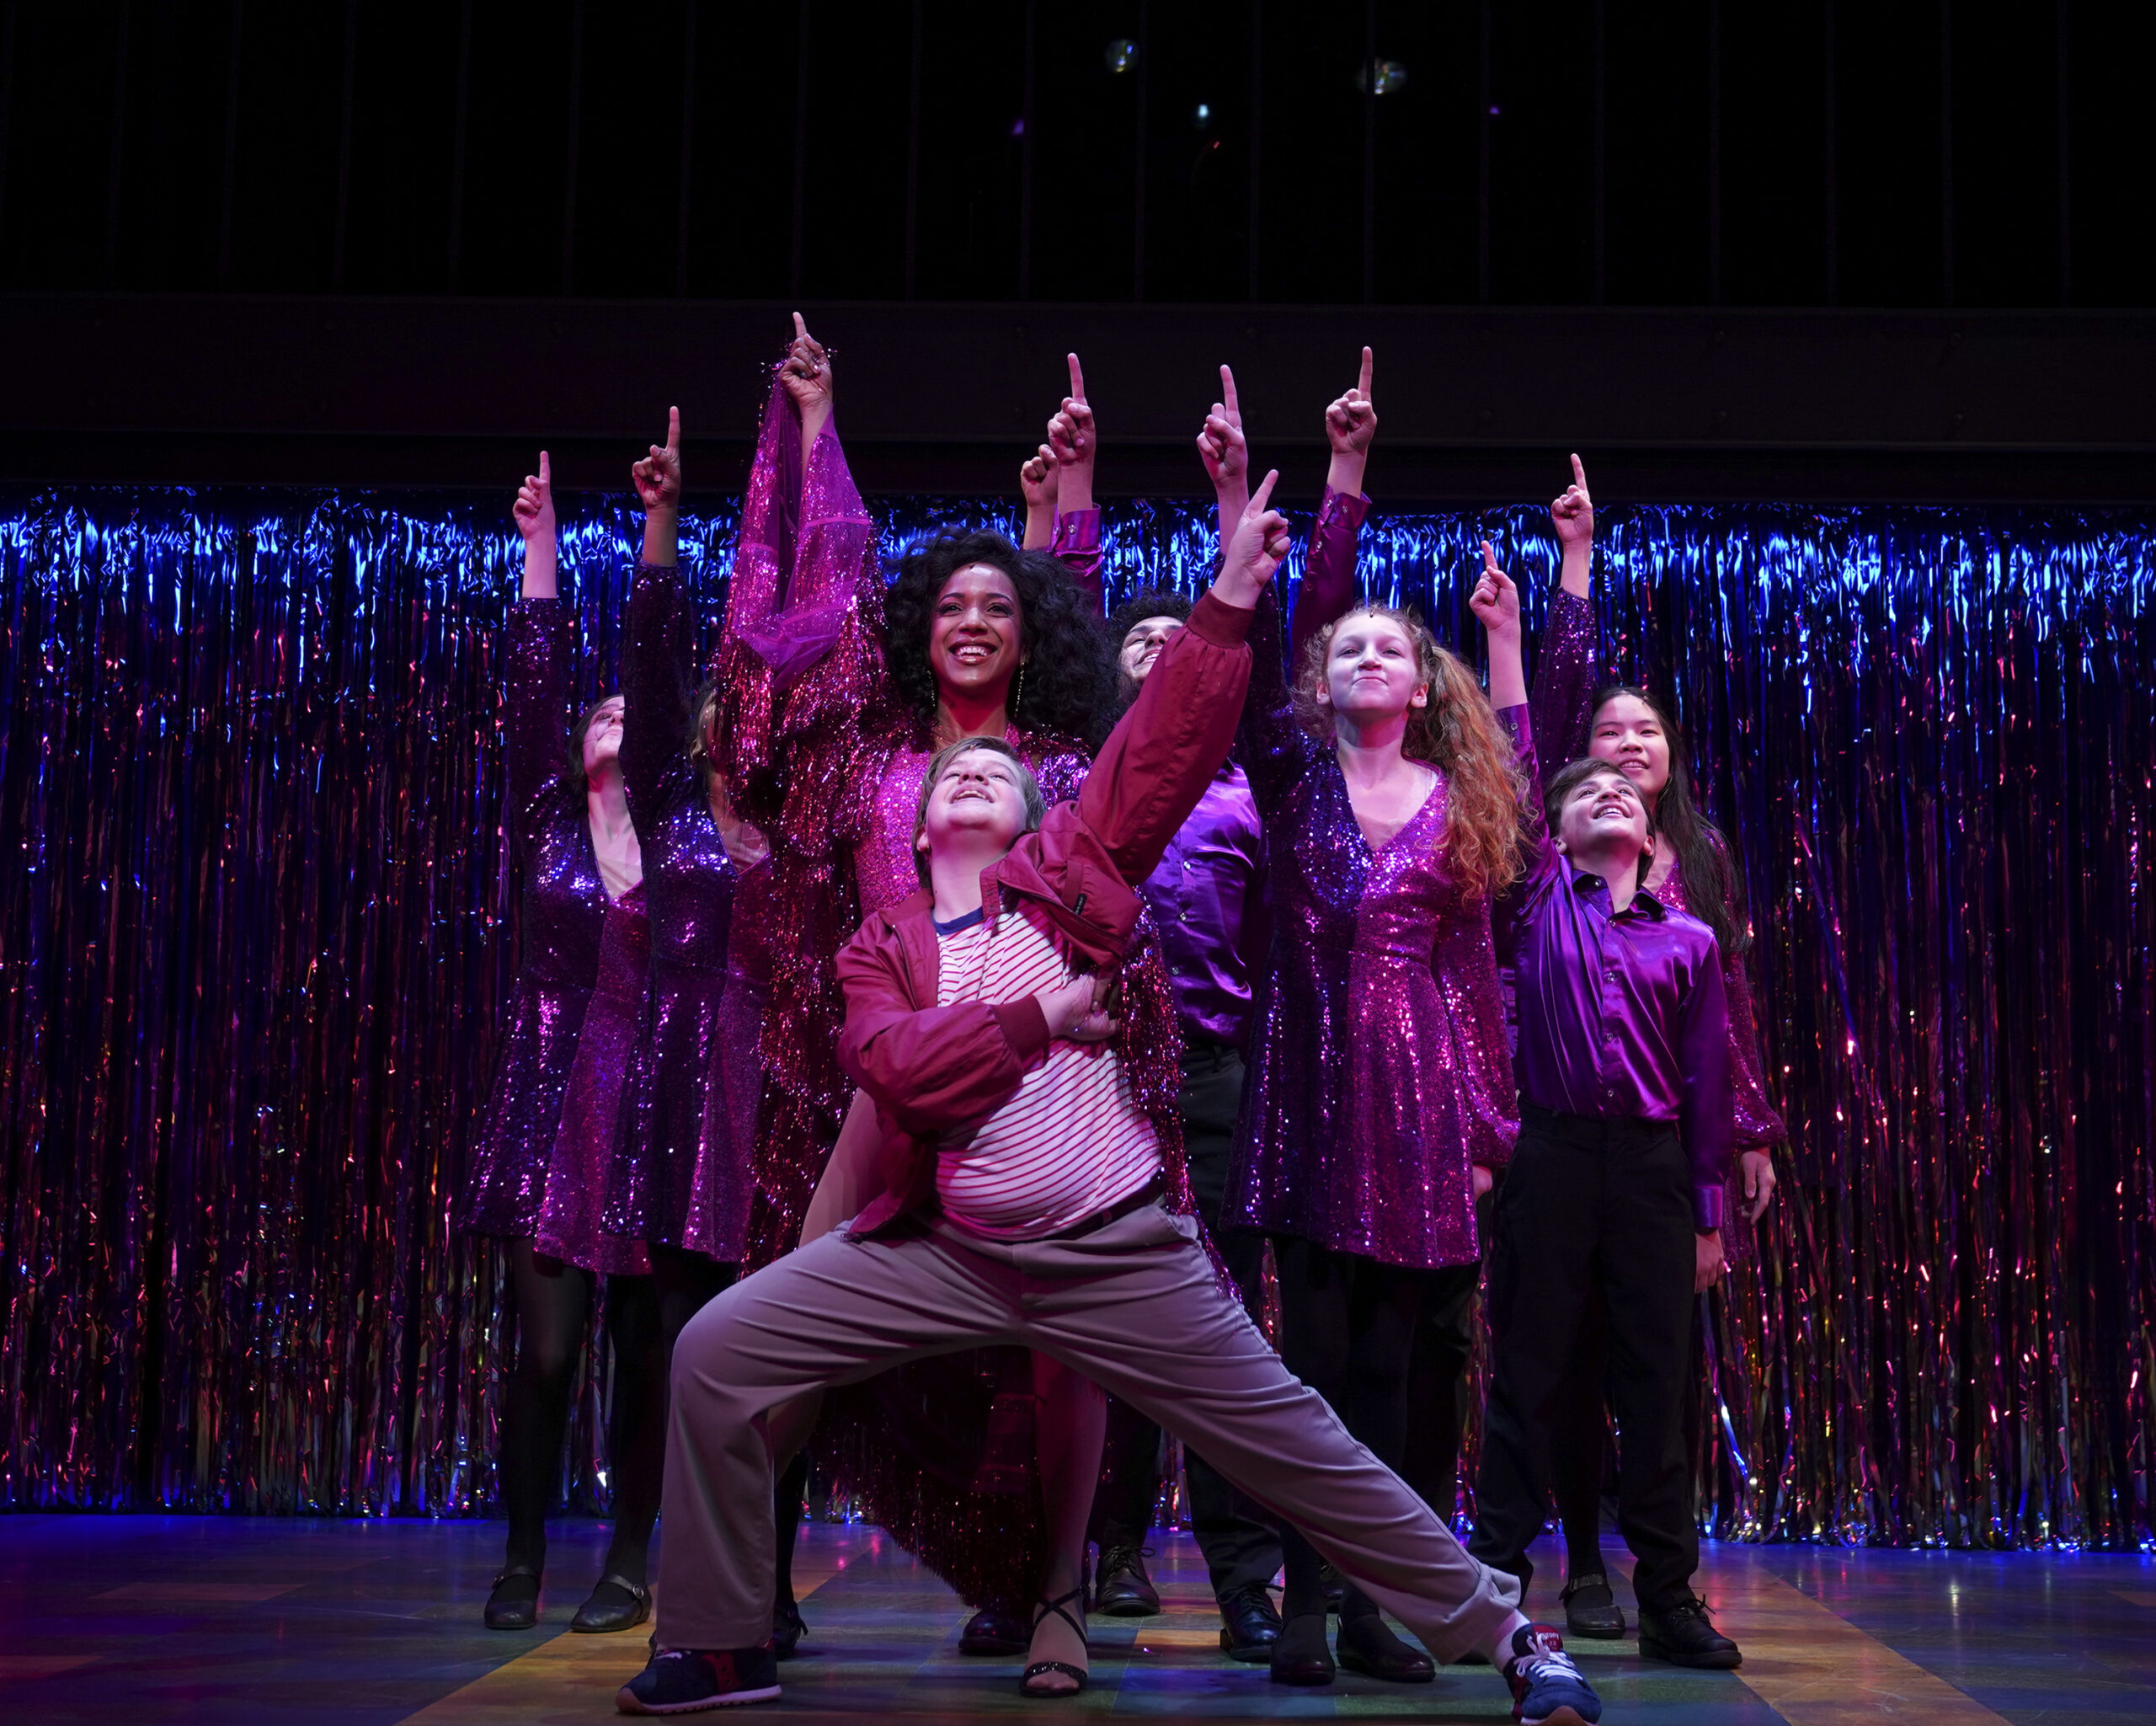 Yasmeen Sulieman, Holden Hagelberger and the cast of <i>Trevor: The Musical</i>. Photo by Joan Marcus for Disney.